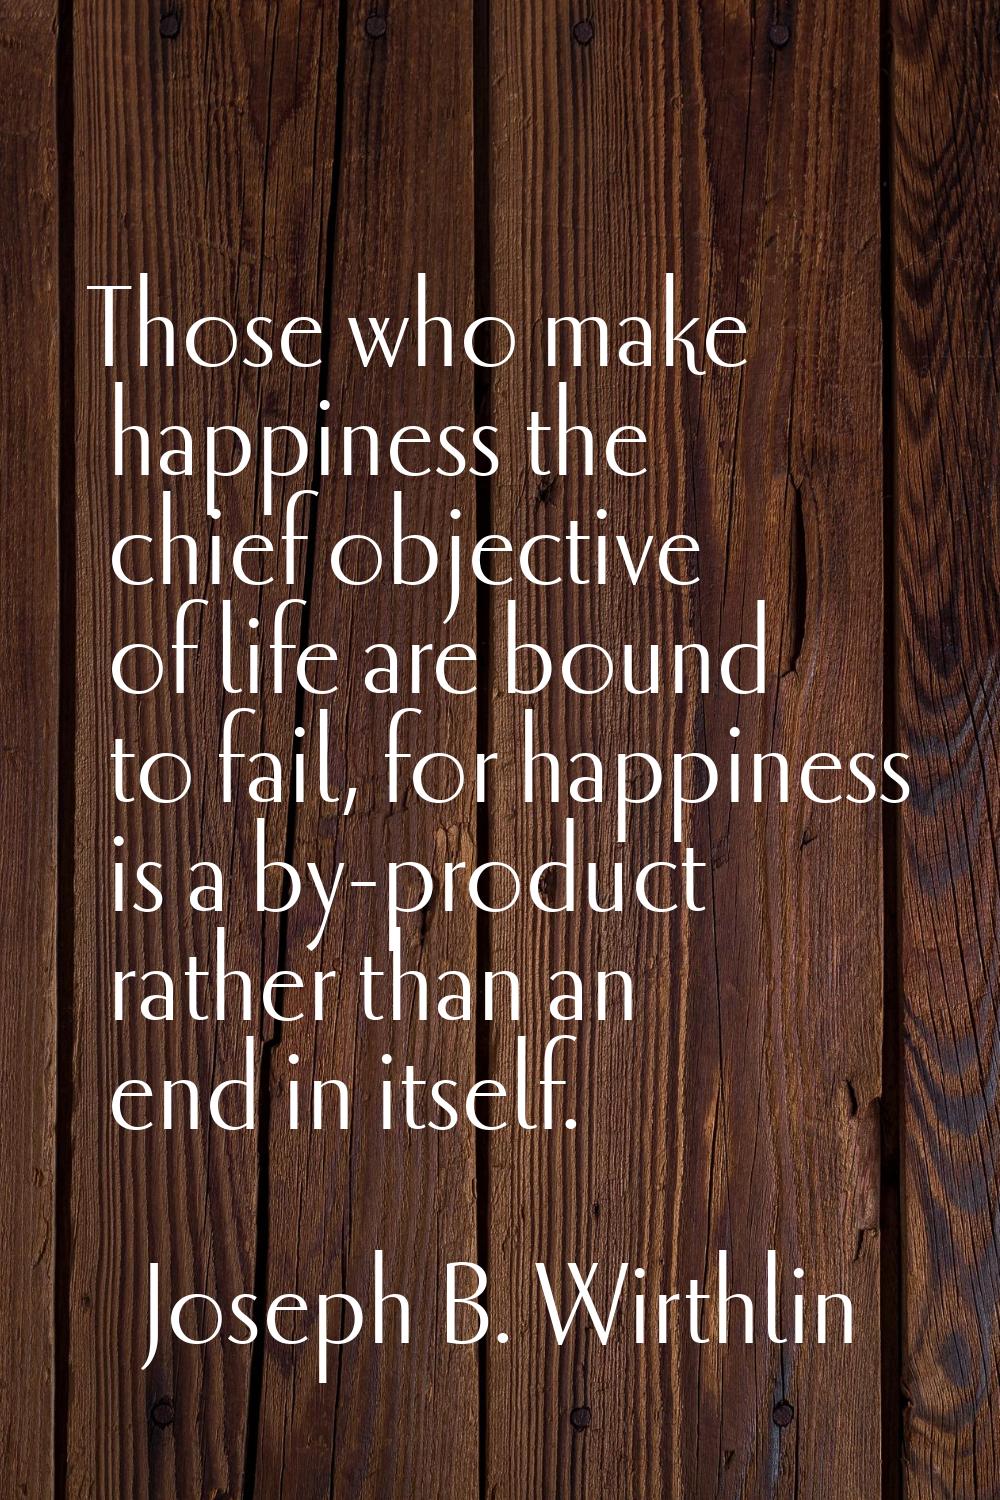 Those who make happiness the chief objective of life are bound to fail, for happiness is a by-produ